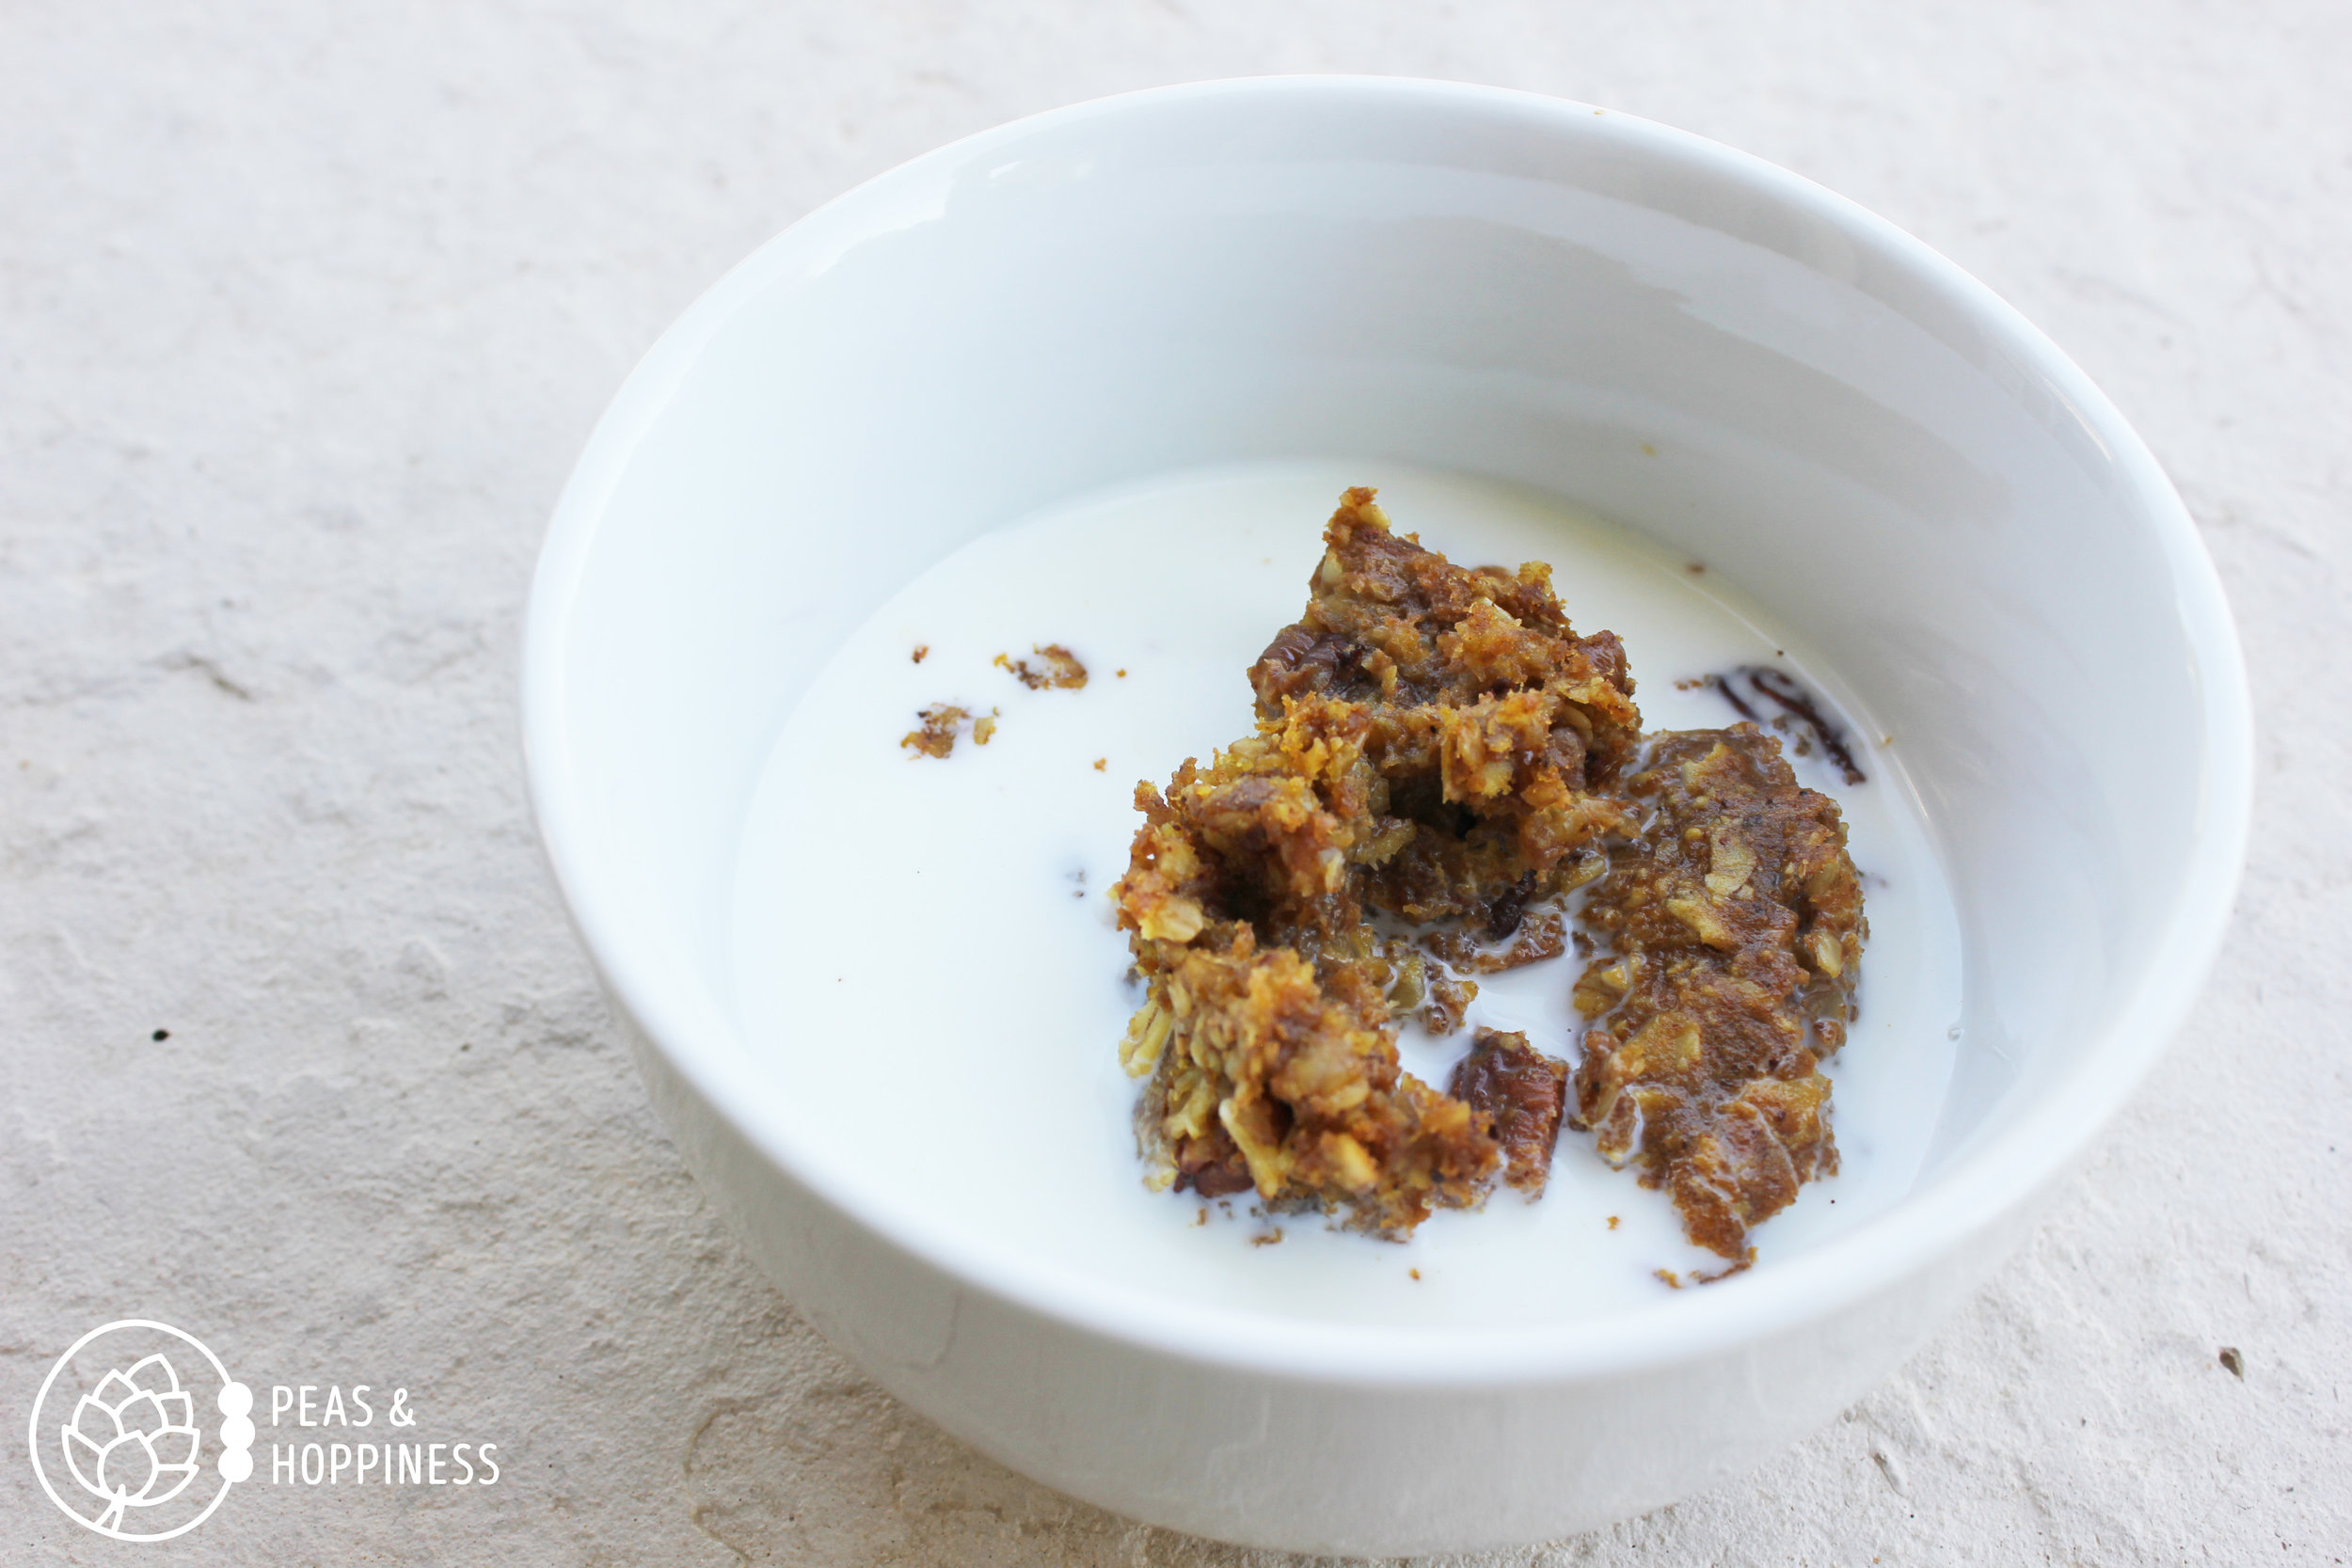 I eat my breakfast bars like cereal - with milk!